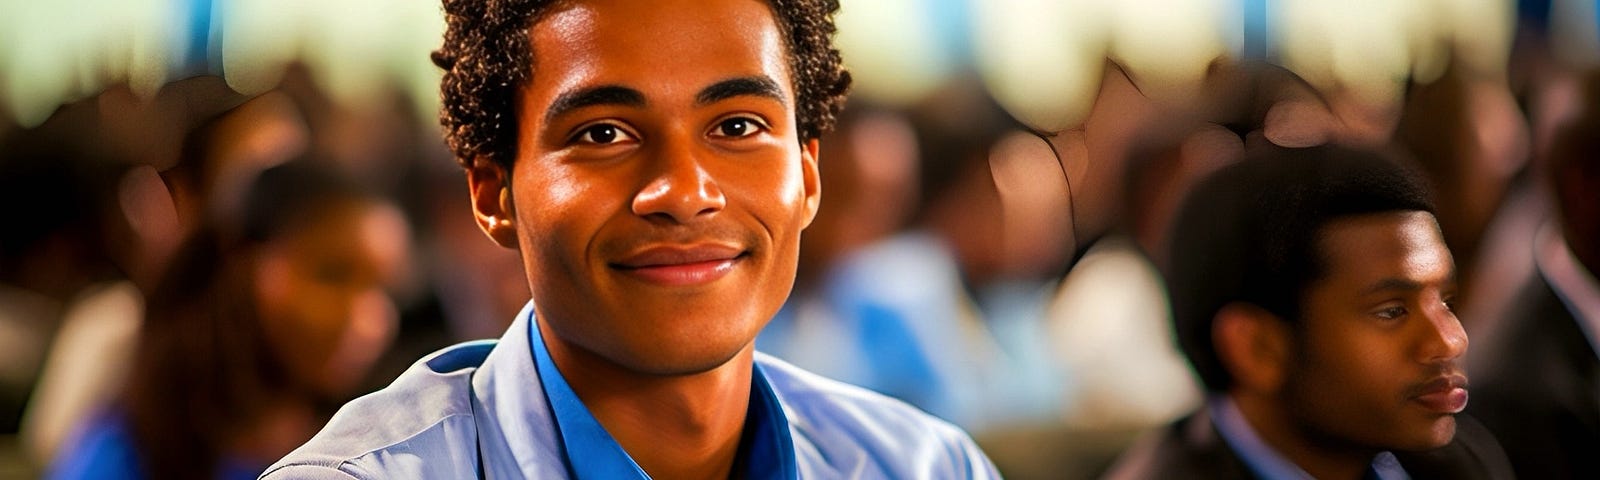 In the spirit of Claude Dambreville, a young Haitian journalist is depicted with a bright, optimistic smile, wearing a blue shirt and tie, seated in a conference hall filled with delegates in Haiti.